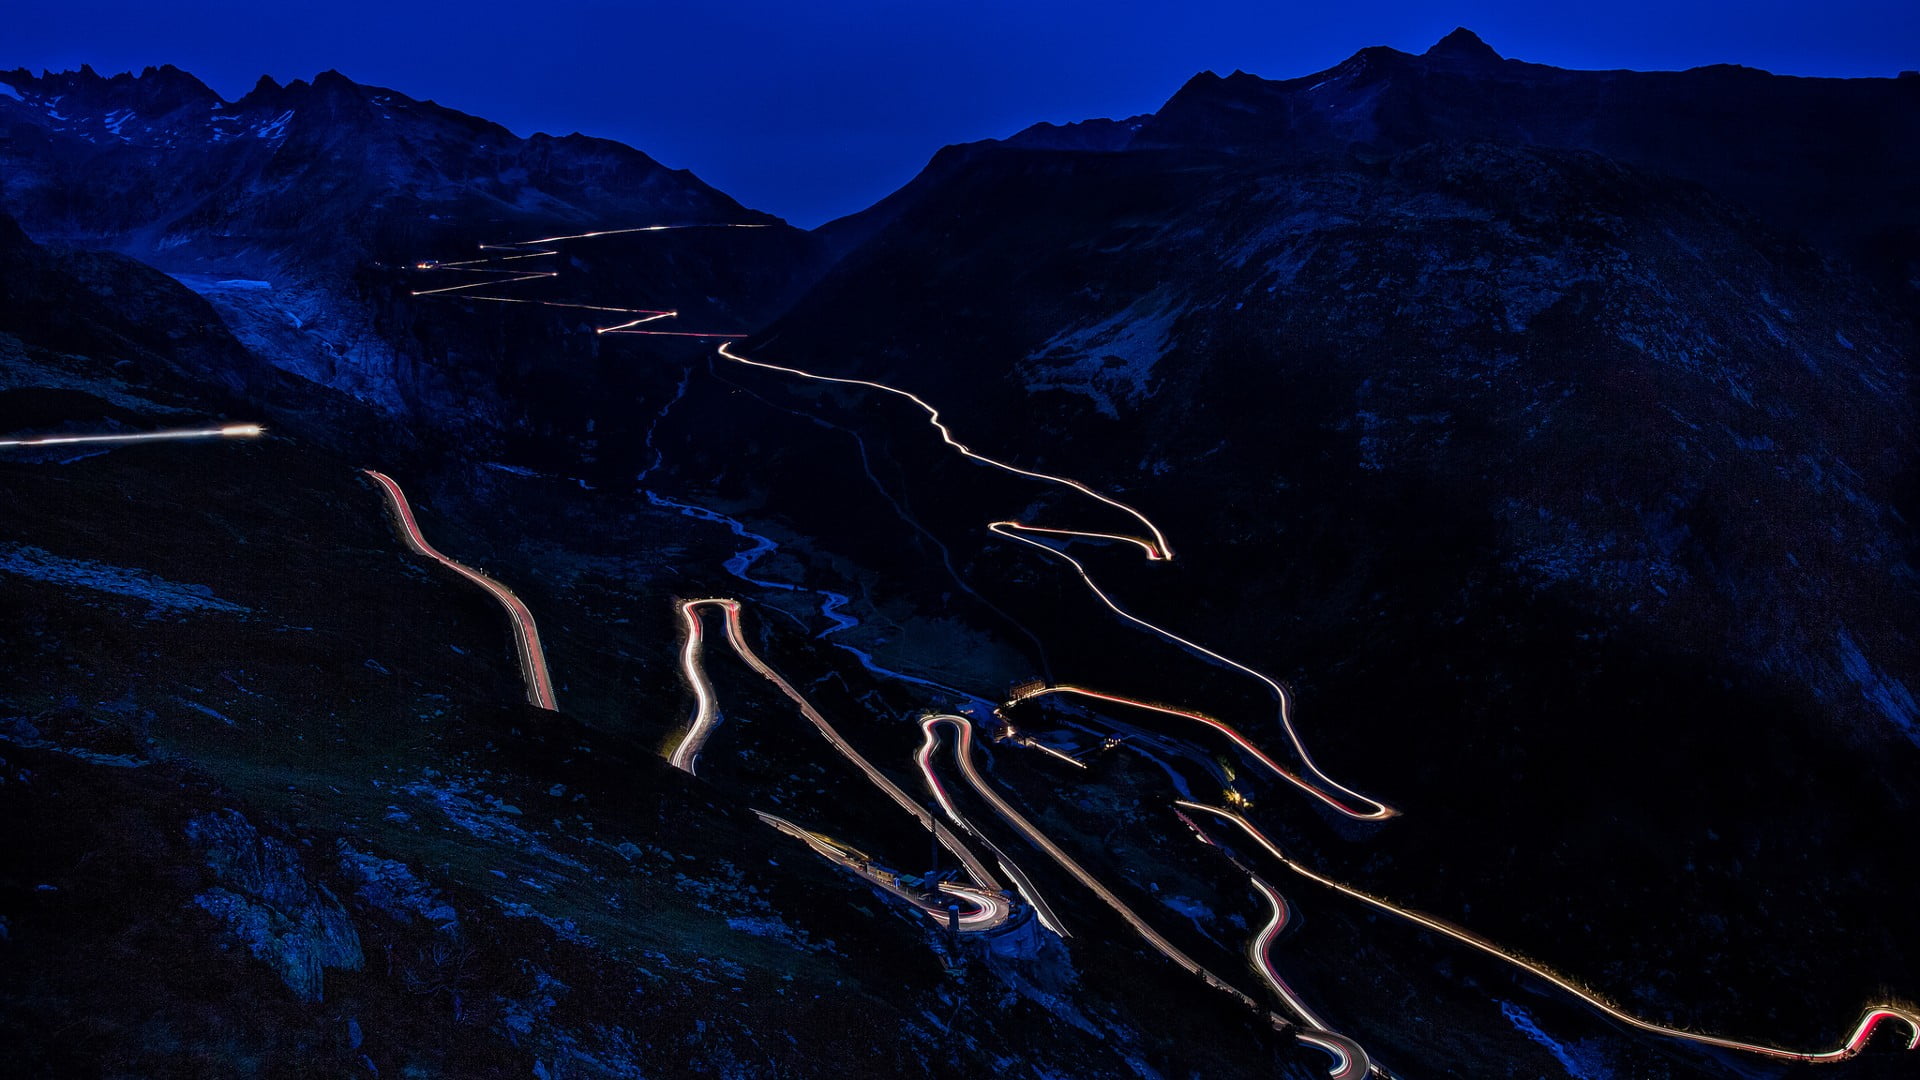 mountain road and mountain ranges, mountains, night, long exposure, road